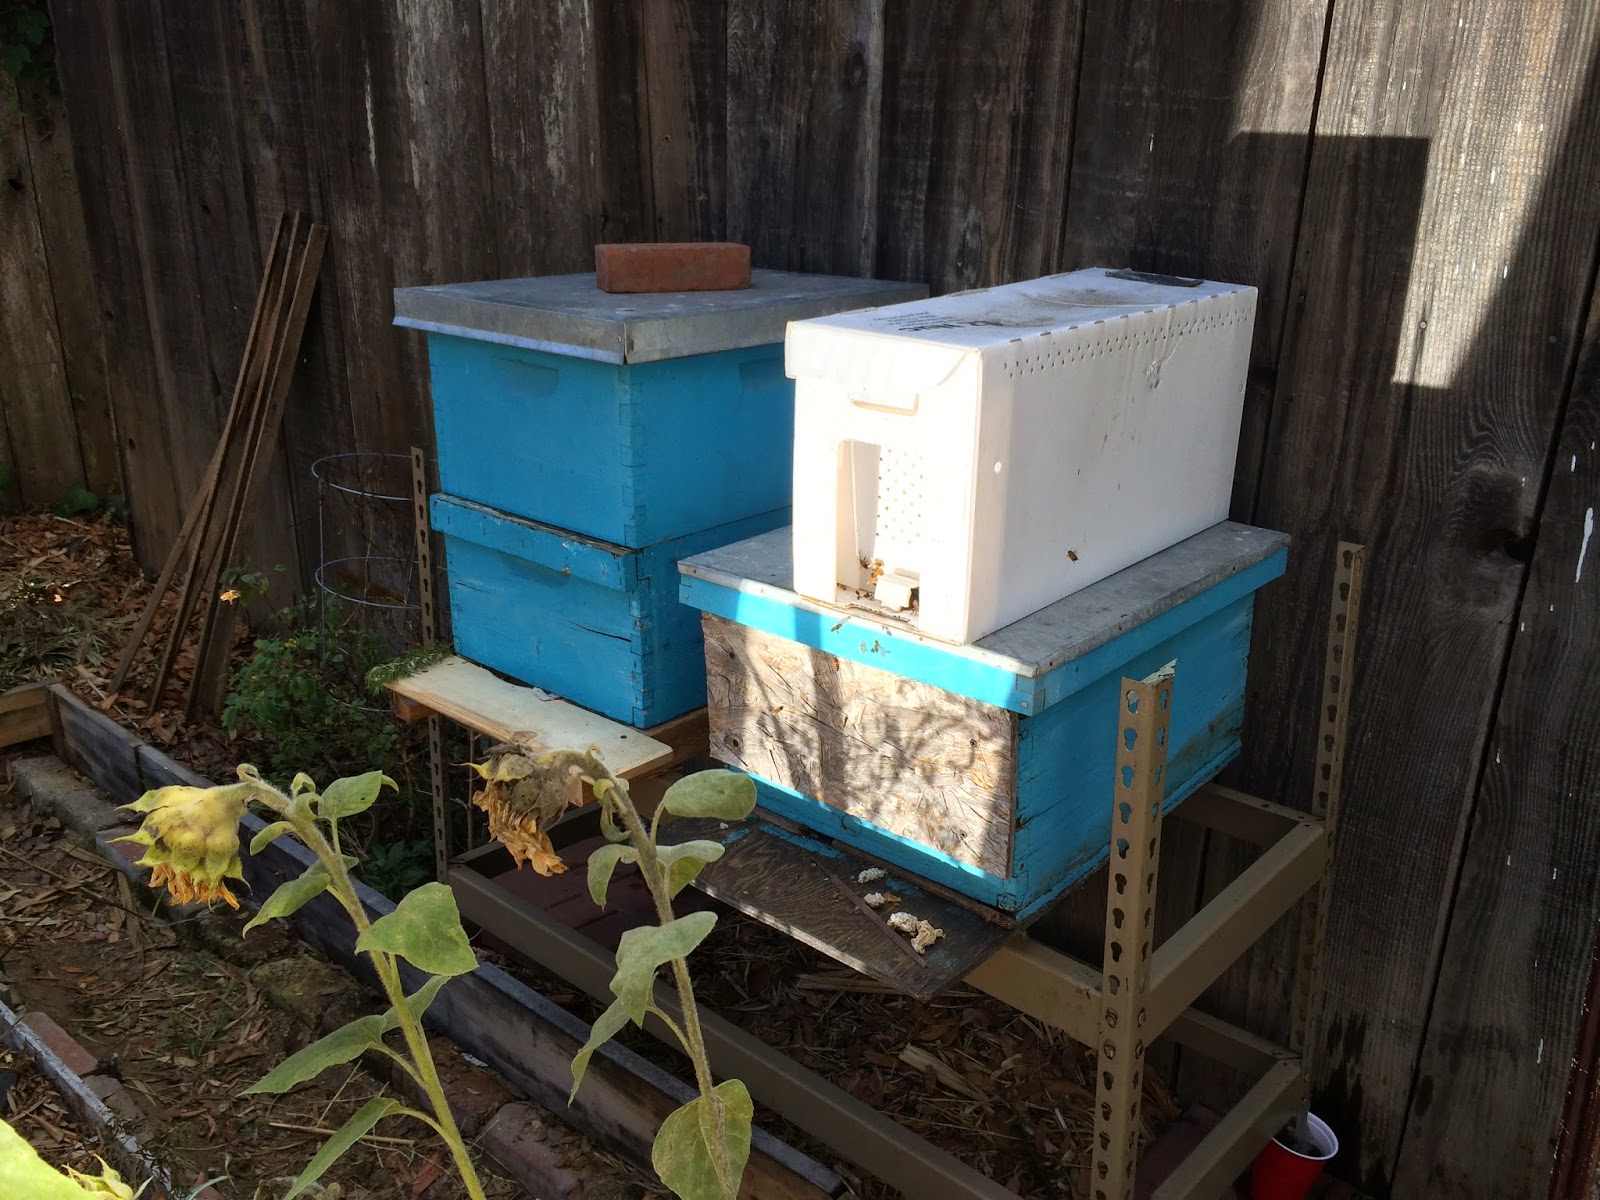 Bees in their new home